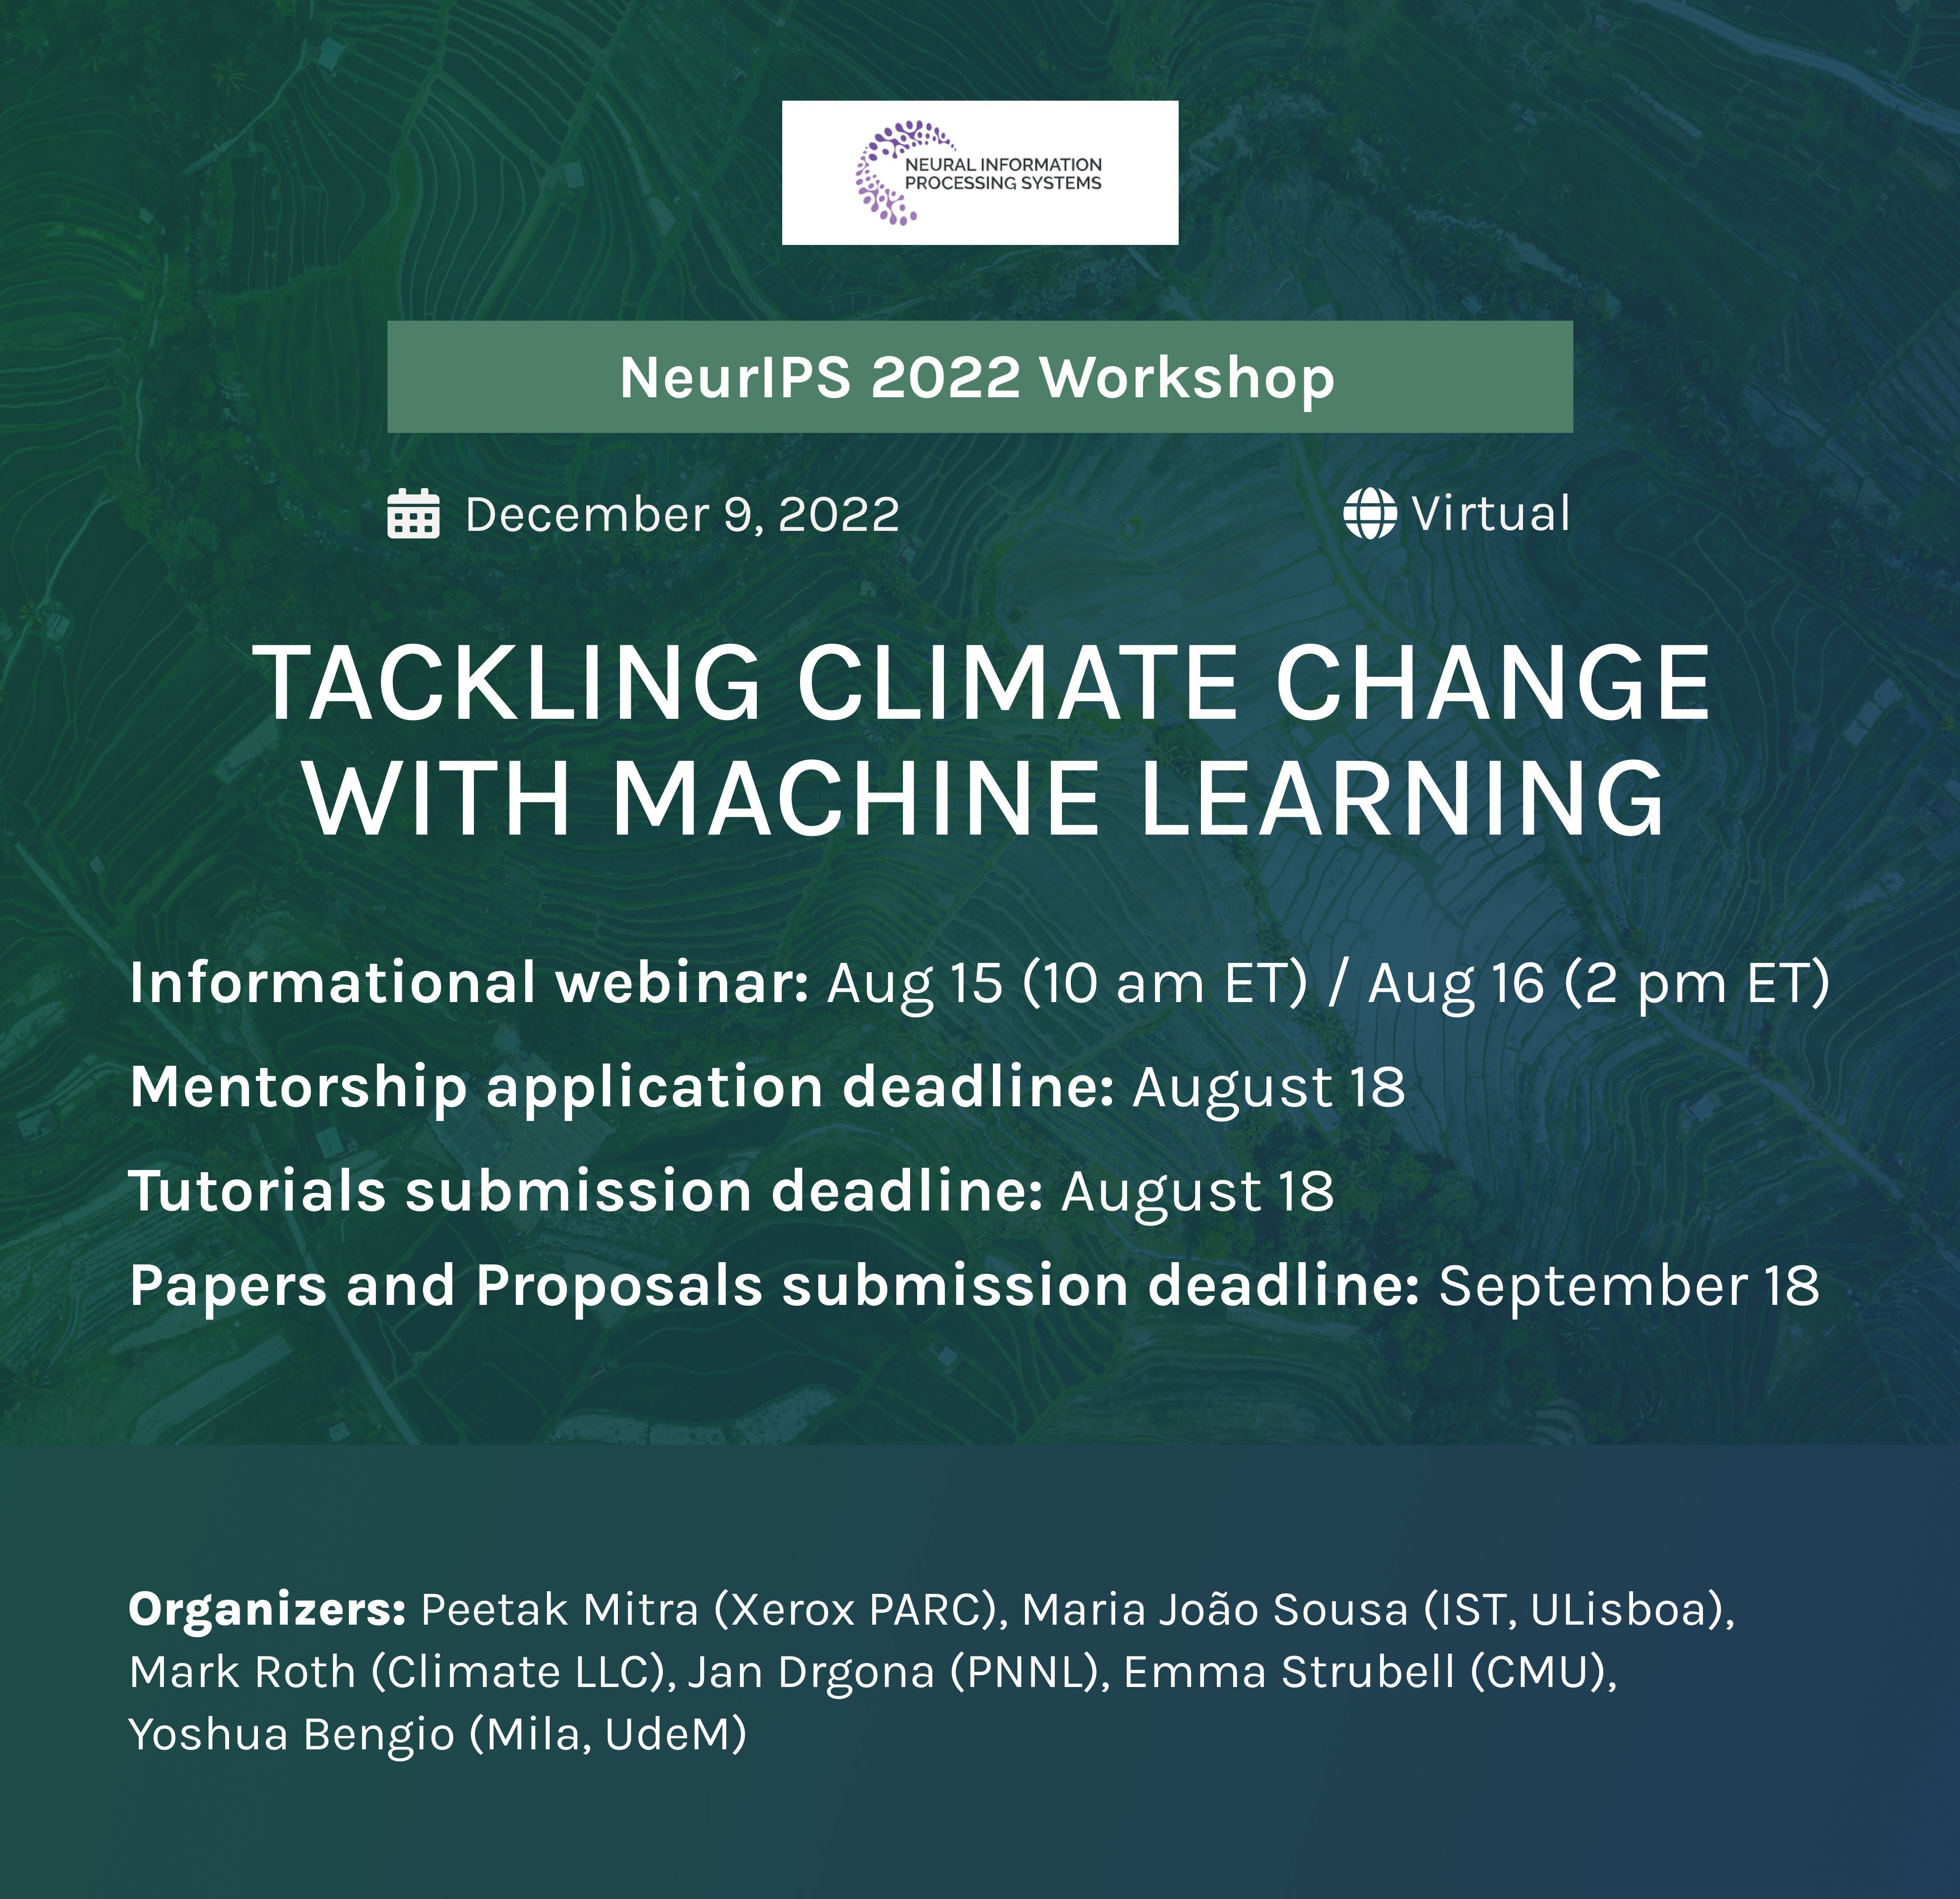 NeurIPS 2022 Workshop Tackling Climate Change with Machine Learning